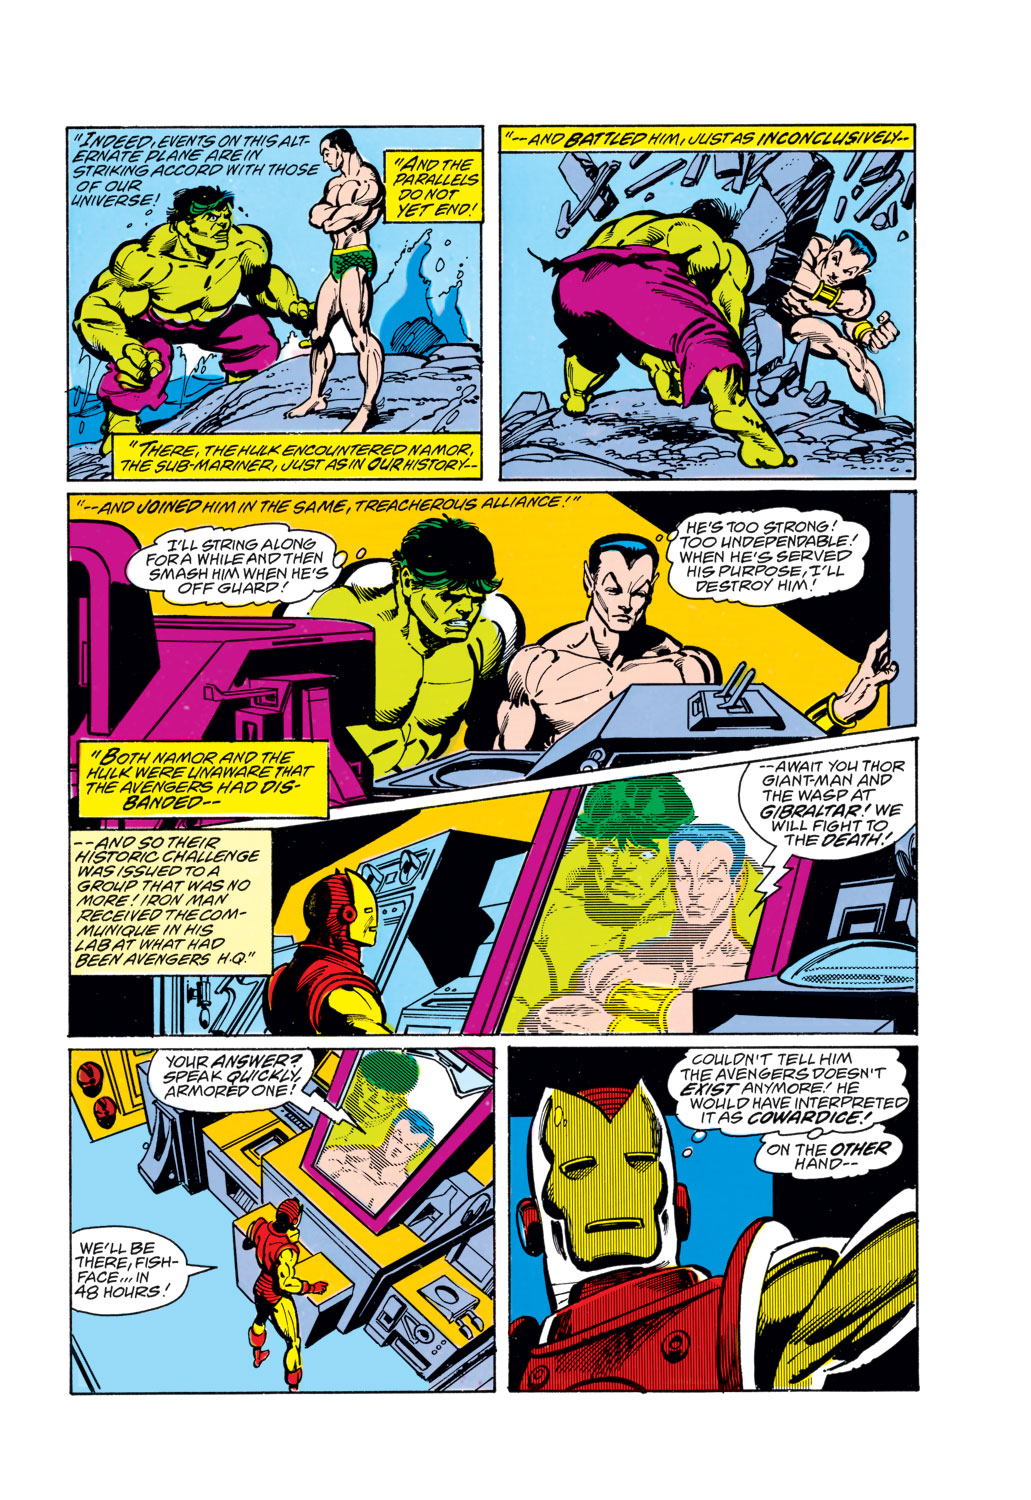 What If? (1977) issue 3 - The Avengers had never been - Page 10